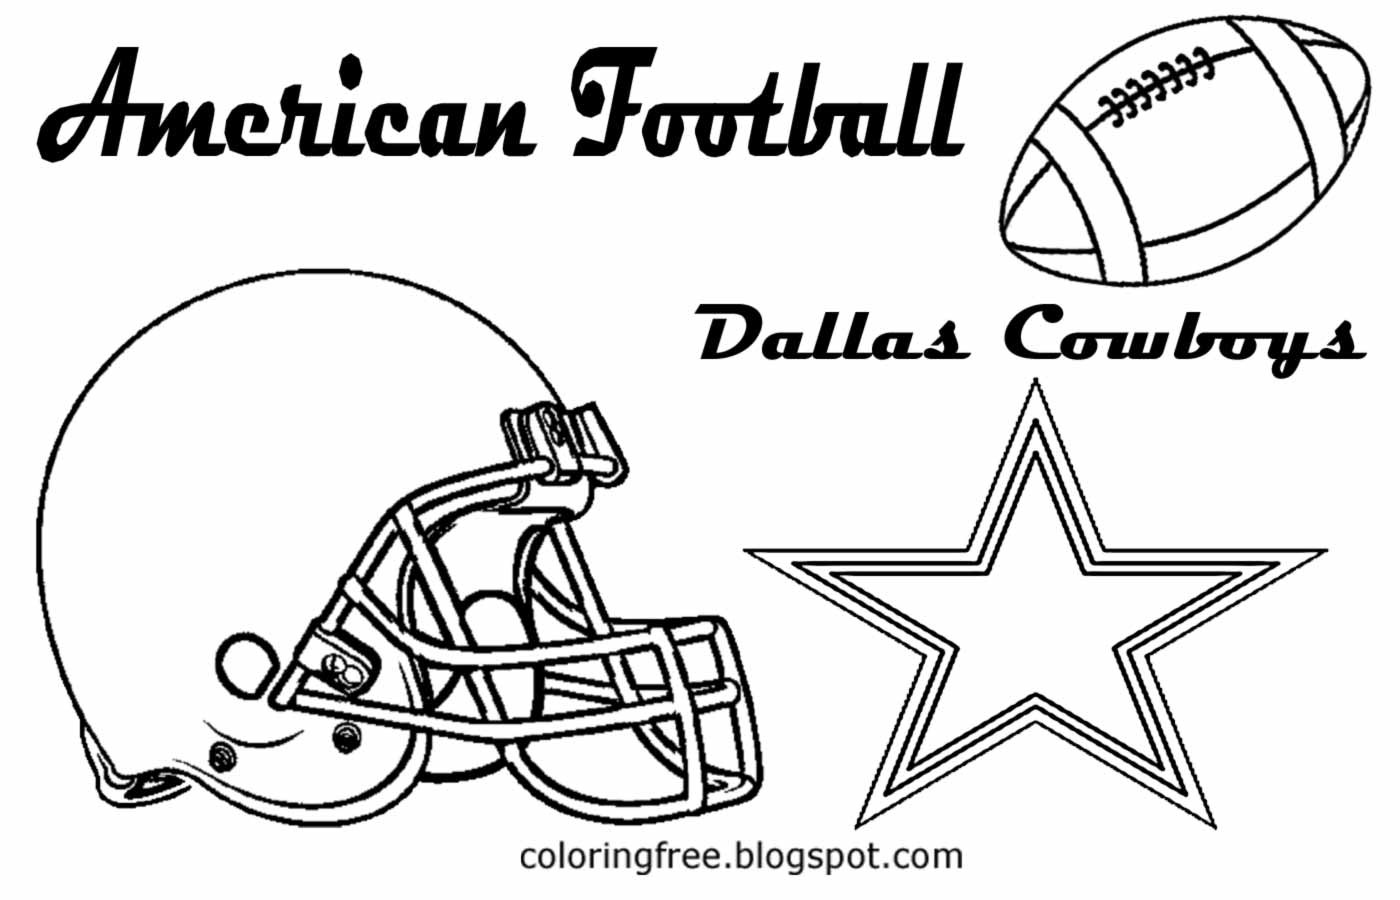 Dallas Cowboys Coloring Book
 Free Coloring Pages Printable To Color Kids